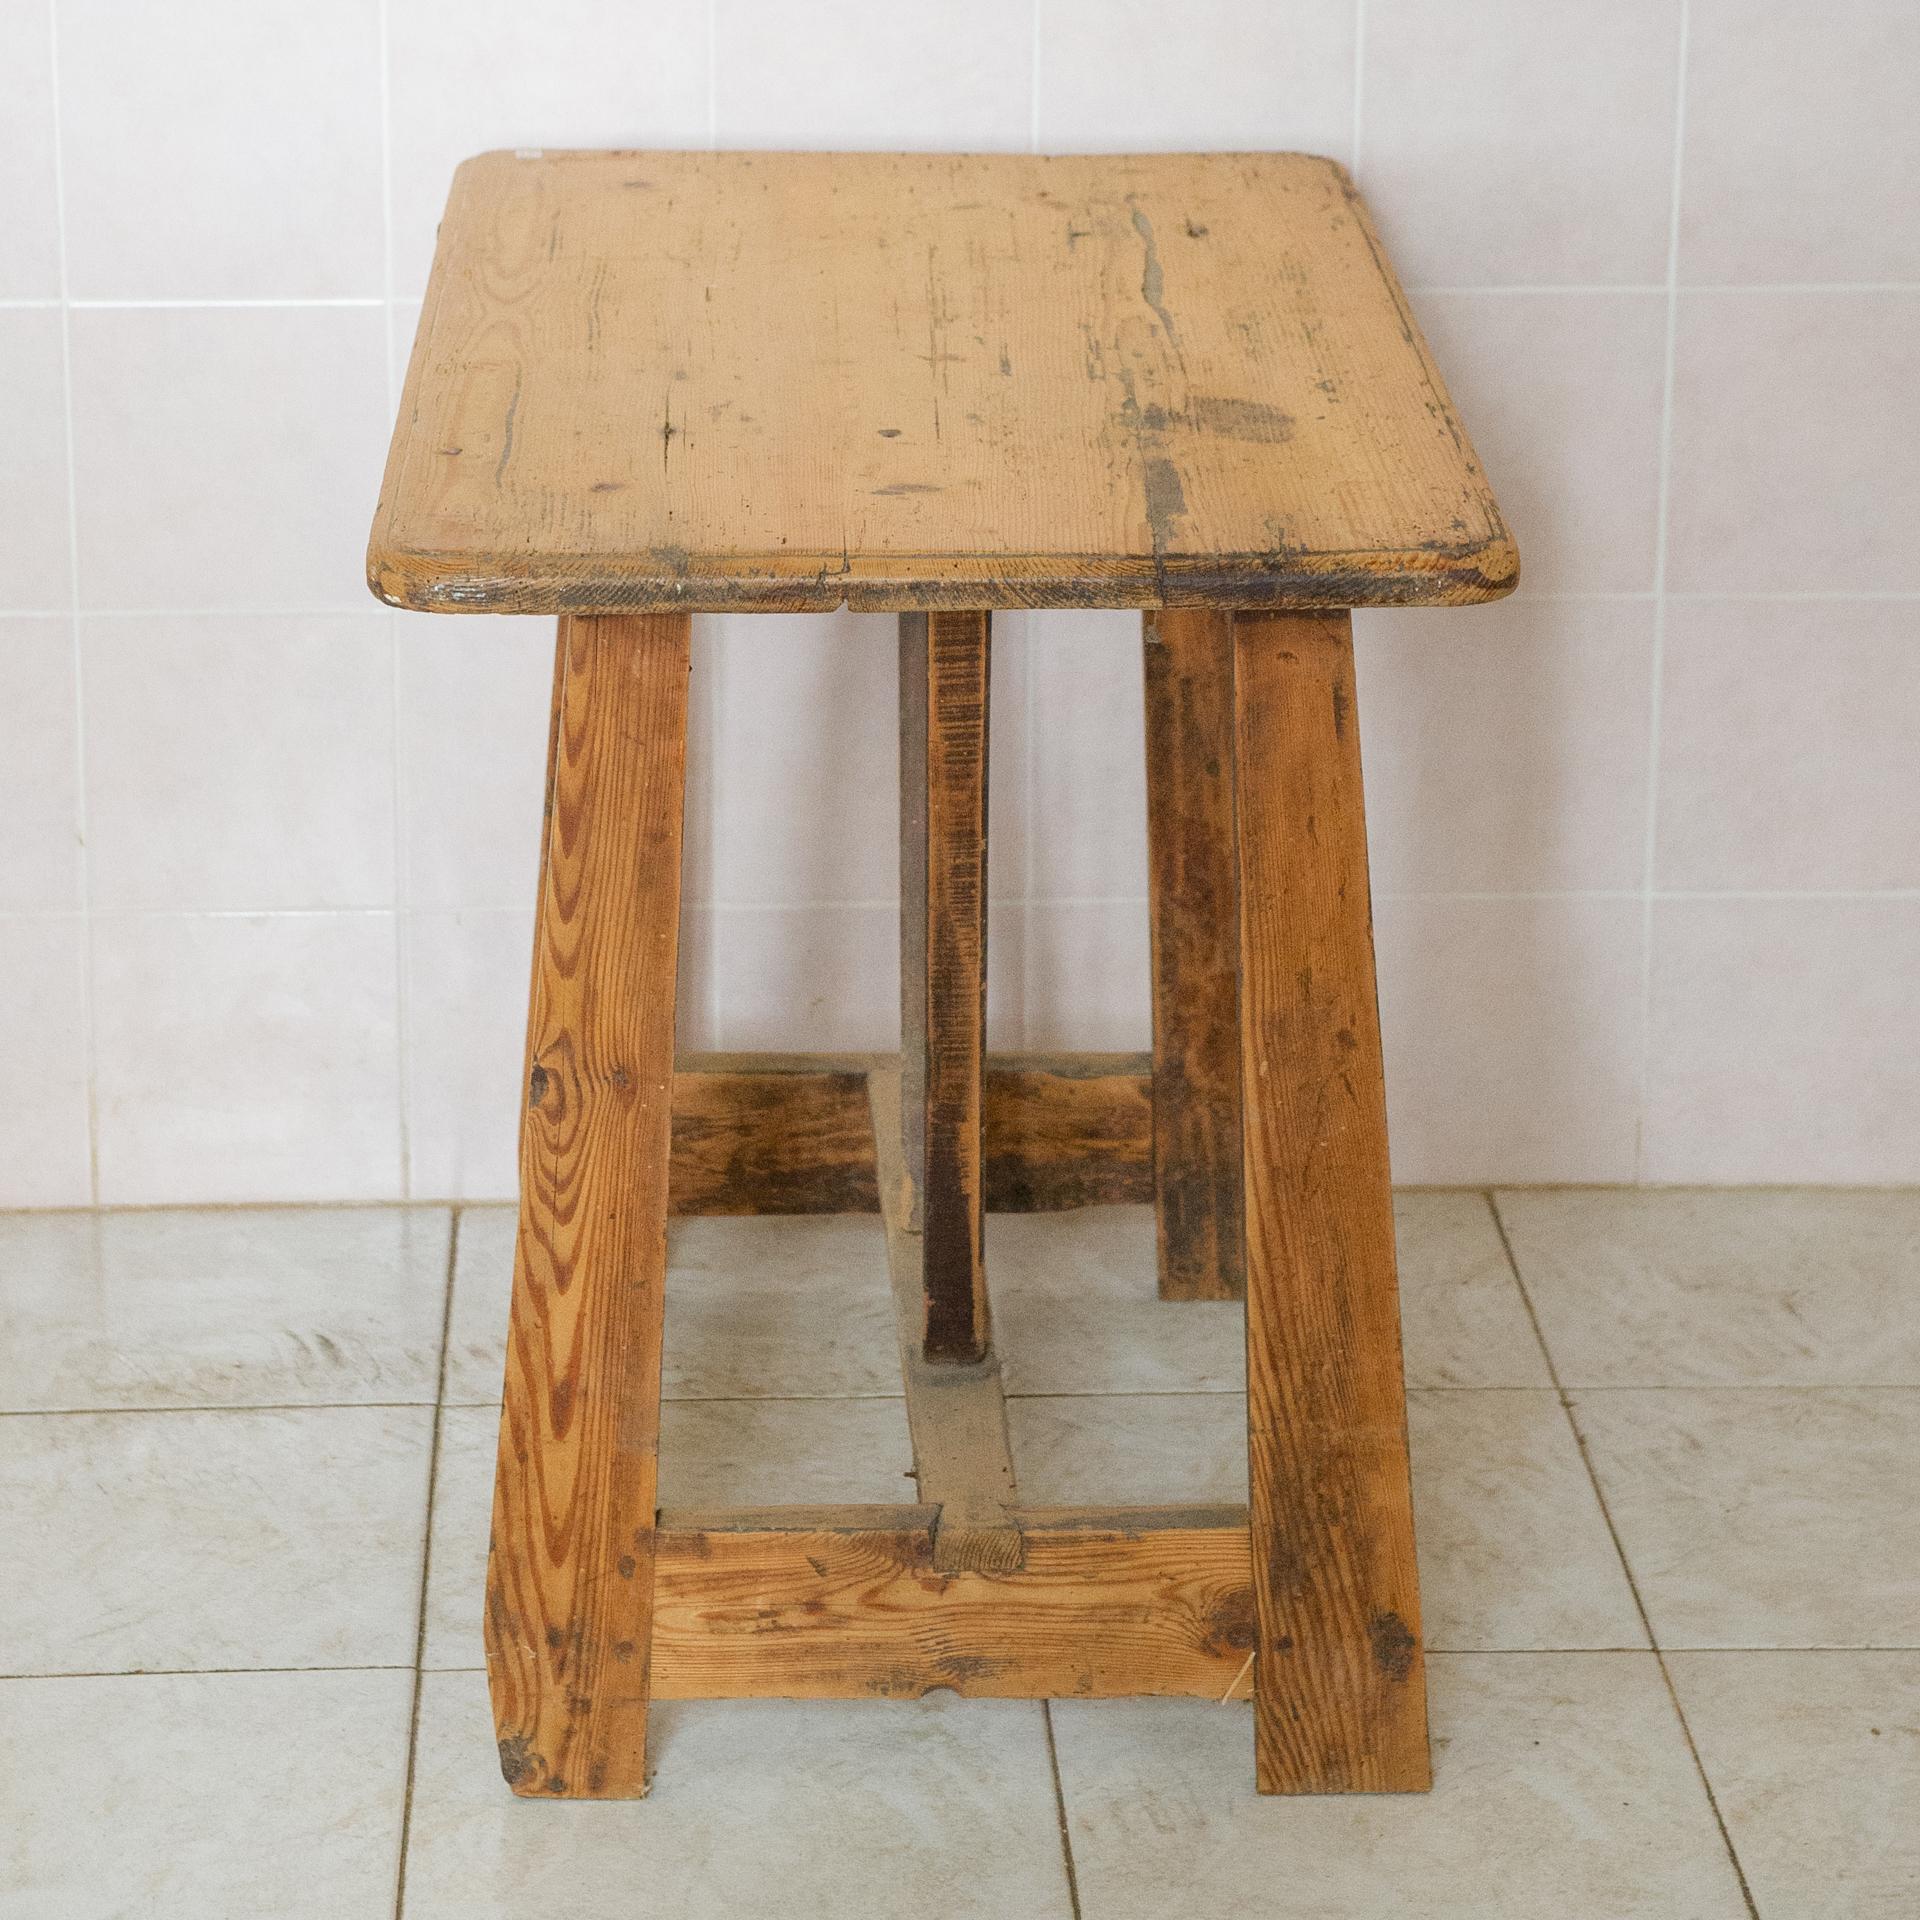 M/1285 - Rustic side table in fir of the beginning '800 or lasr '700, in original condition: in Japanese language 